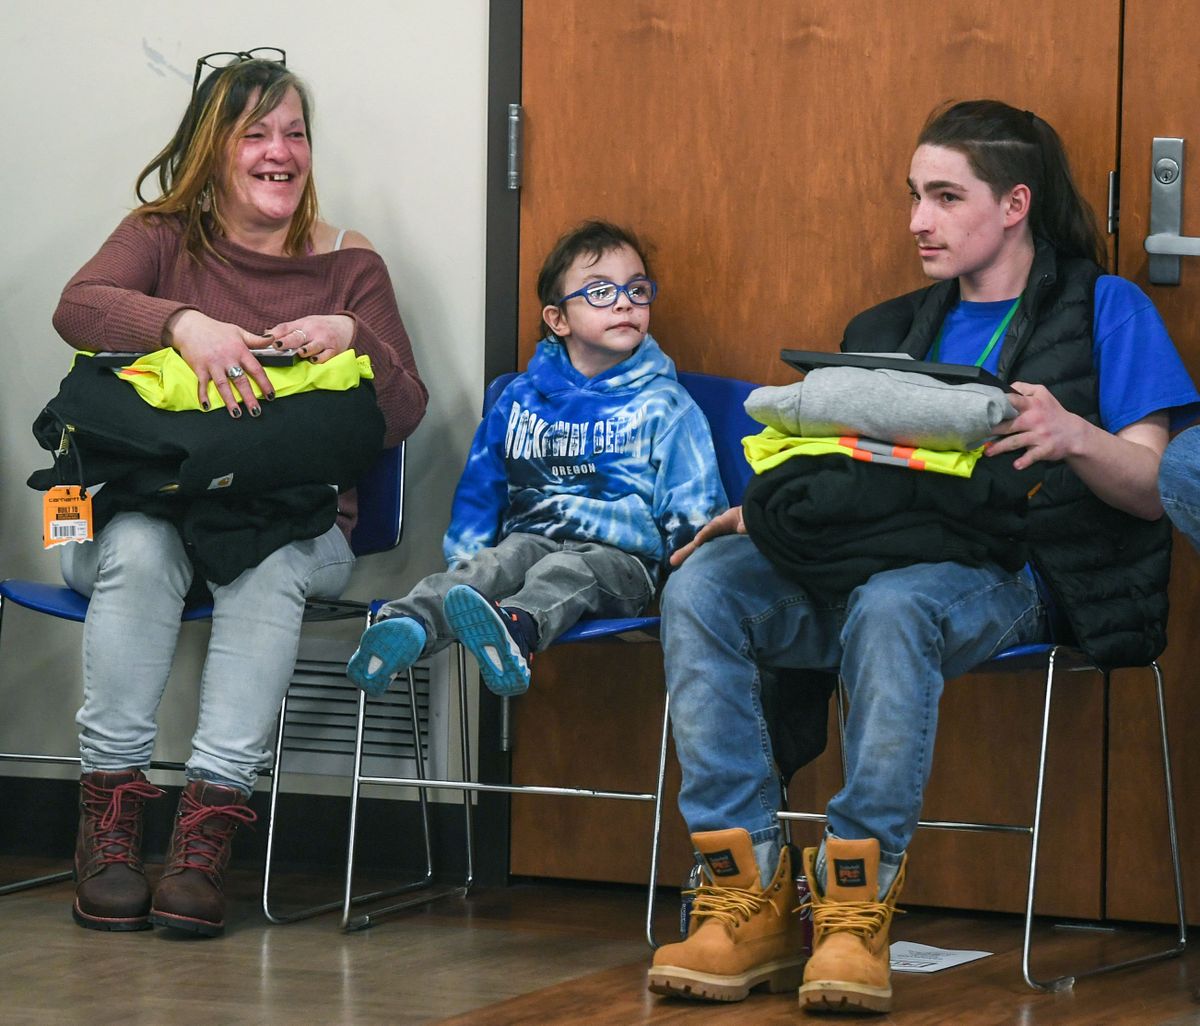 Among students completing the Pre-Employment Preparation Program on Friday at the Northeast Community Center in Spokane are Misty Carson, left, and her son Ryan Carson, right, while visiting with Misty’s grandson, Ezra Austin, 4.  (DAN PELLE/THE SPOKESMAN-REVIEW)